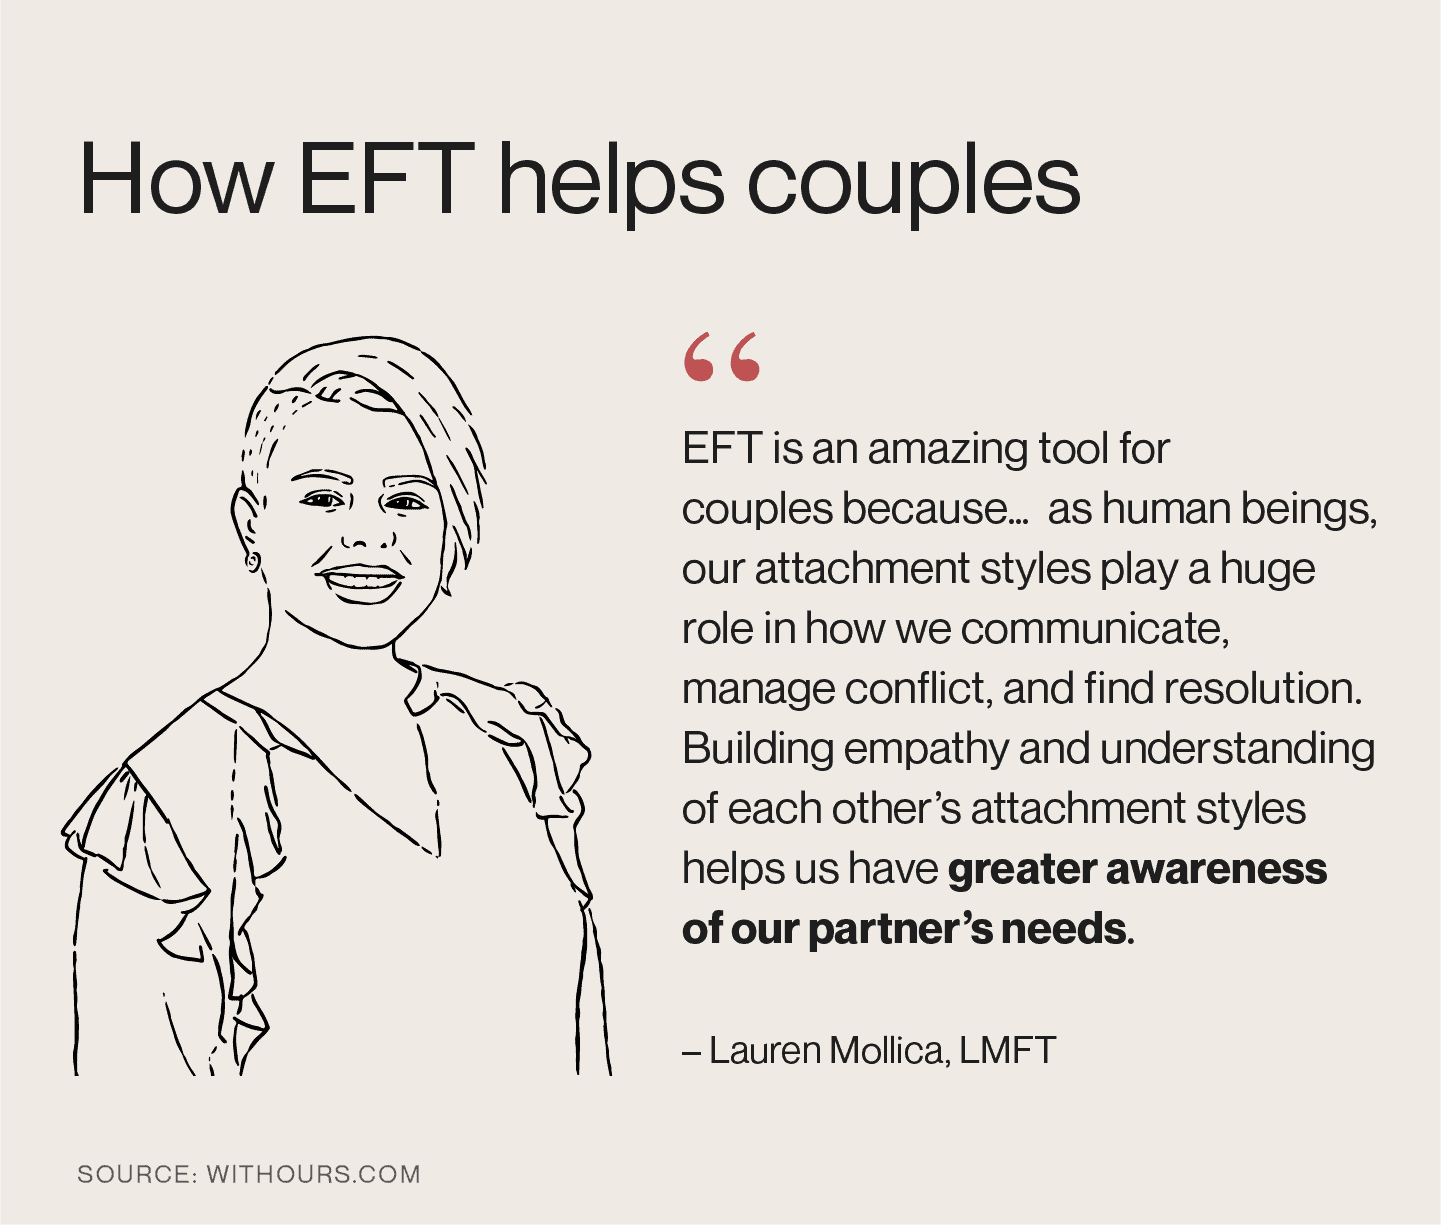 A graphic with a quote from Lauren Mollica, LMFT, explaining the benefits of EFT couples therapy.